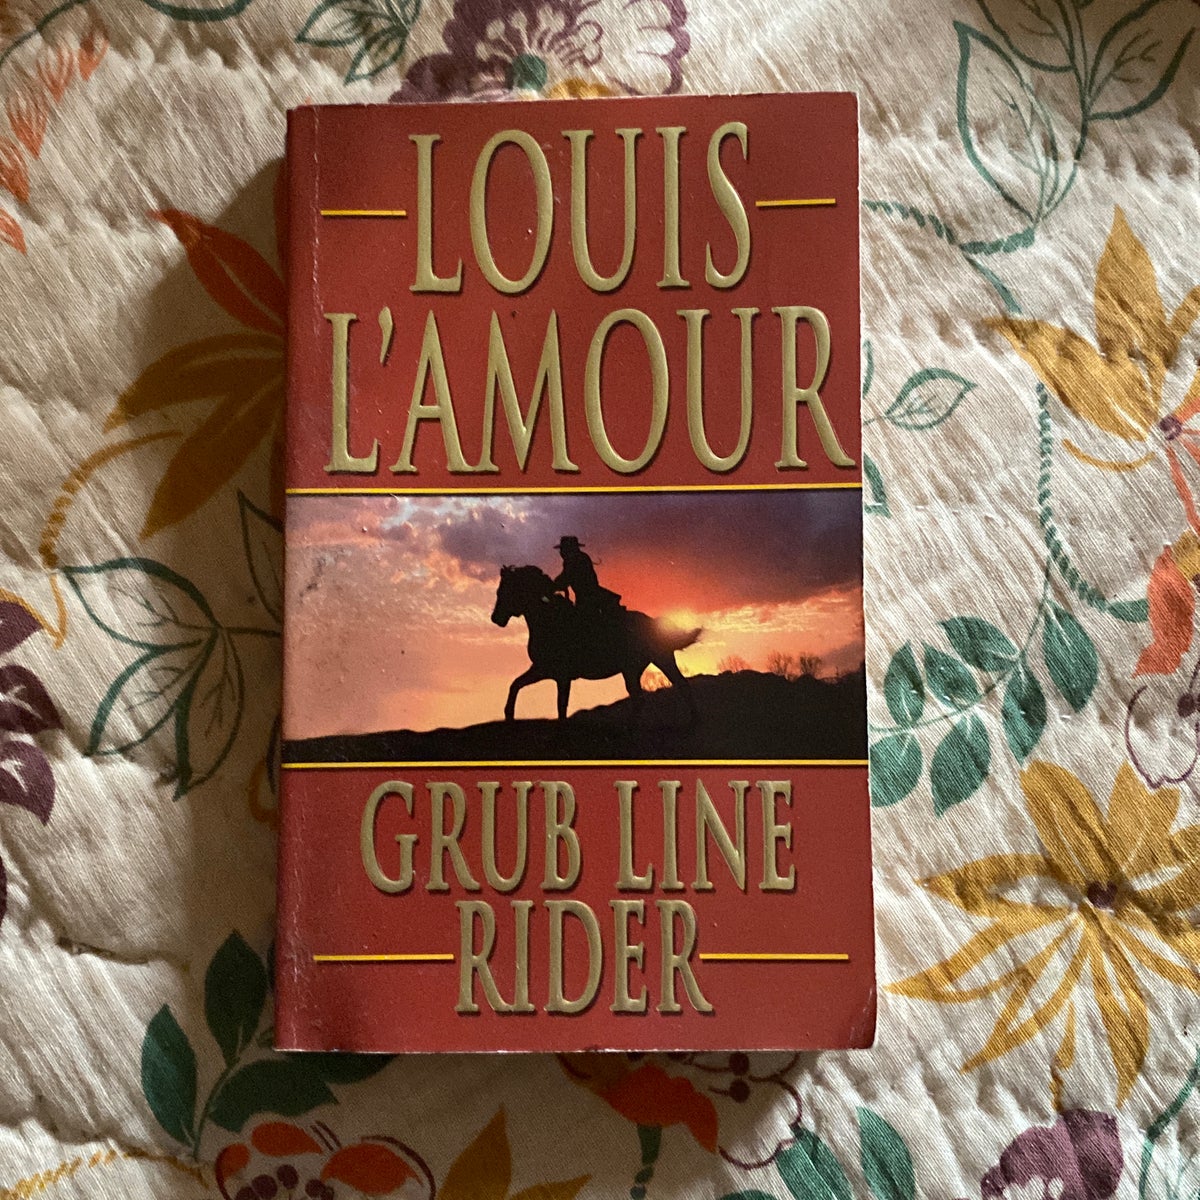 The Shadow Riders - A novel by Louis L'Amour